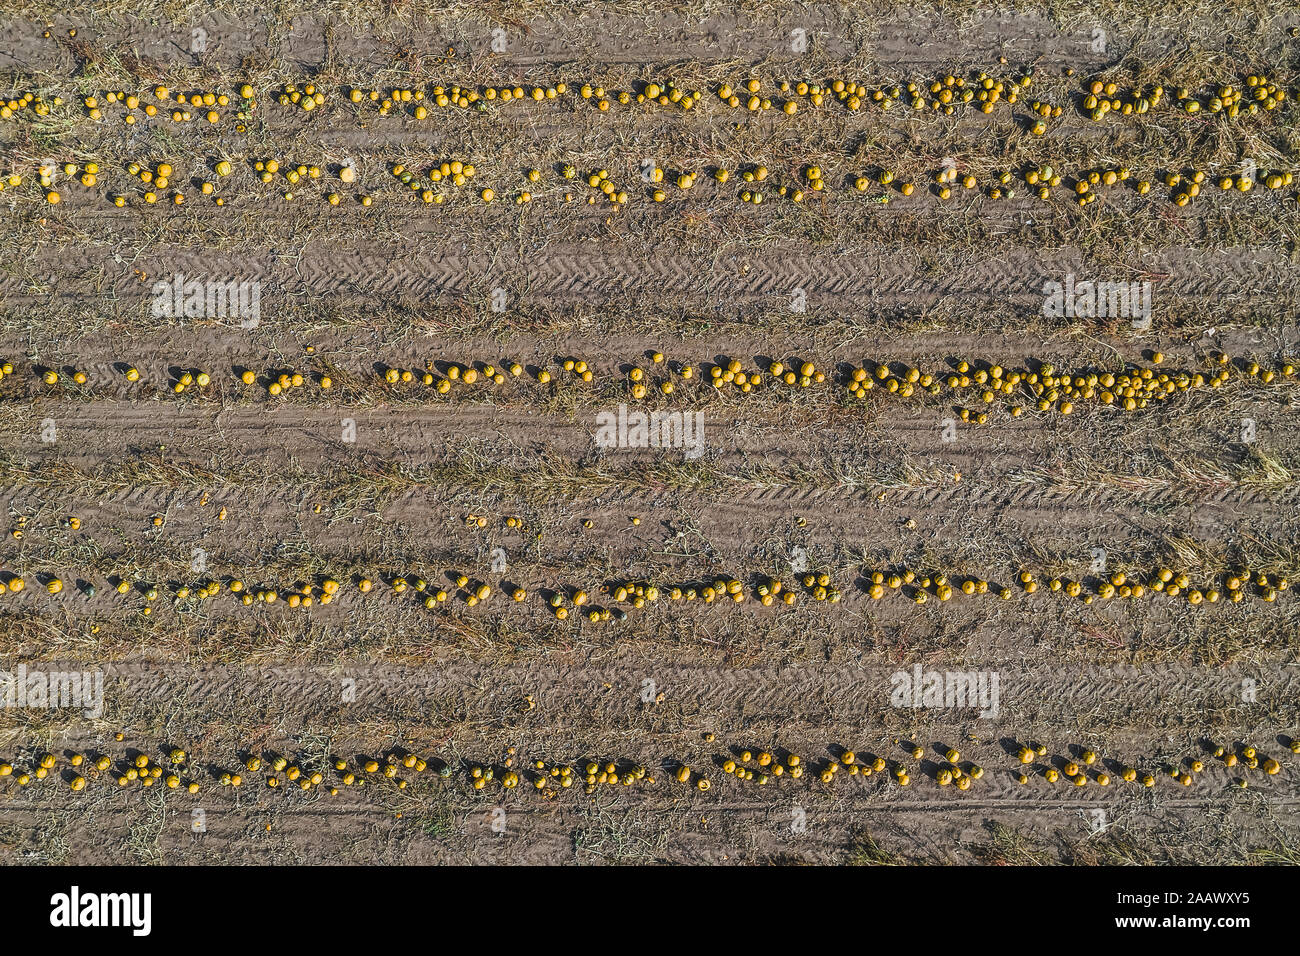 Pumpkin field at harvesttime, aerial view Stock Photo